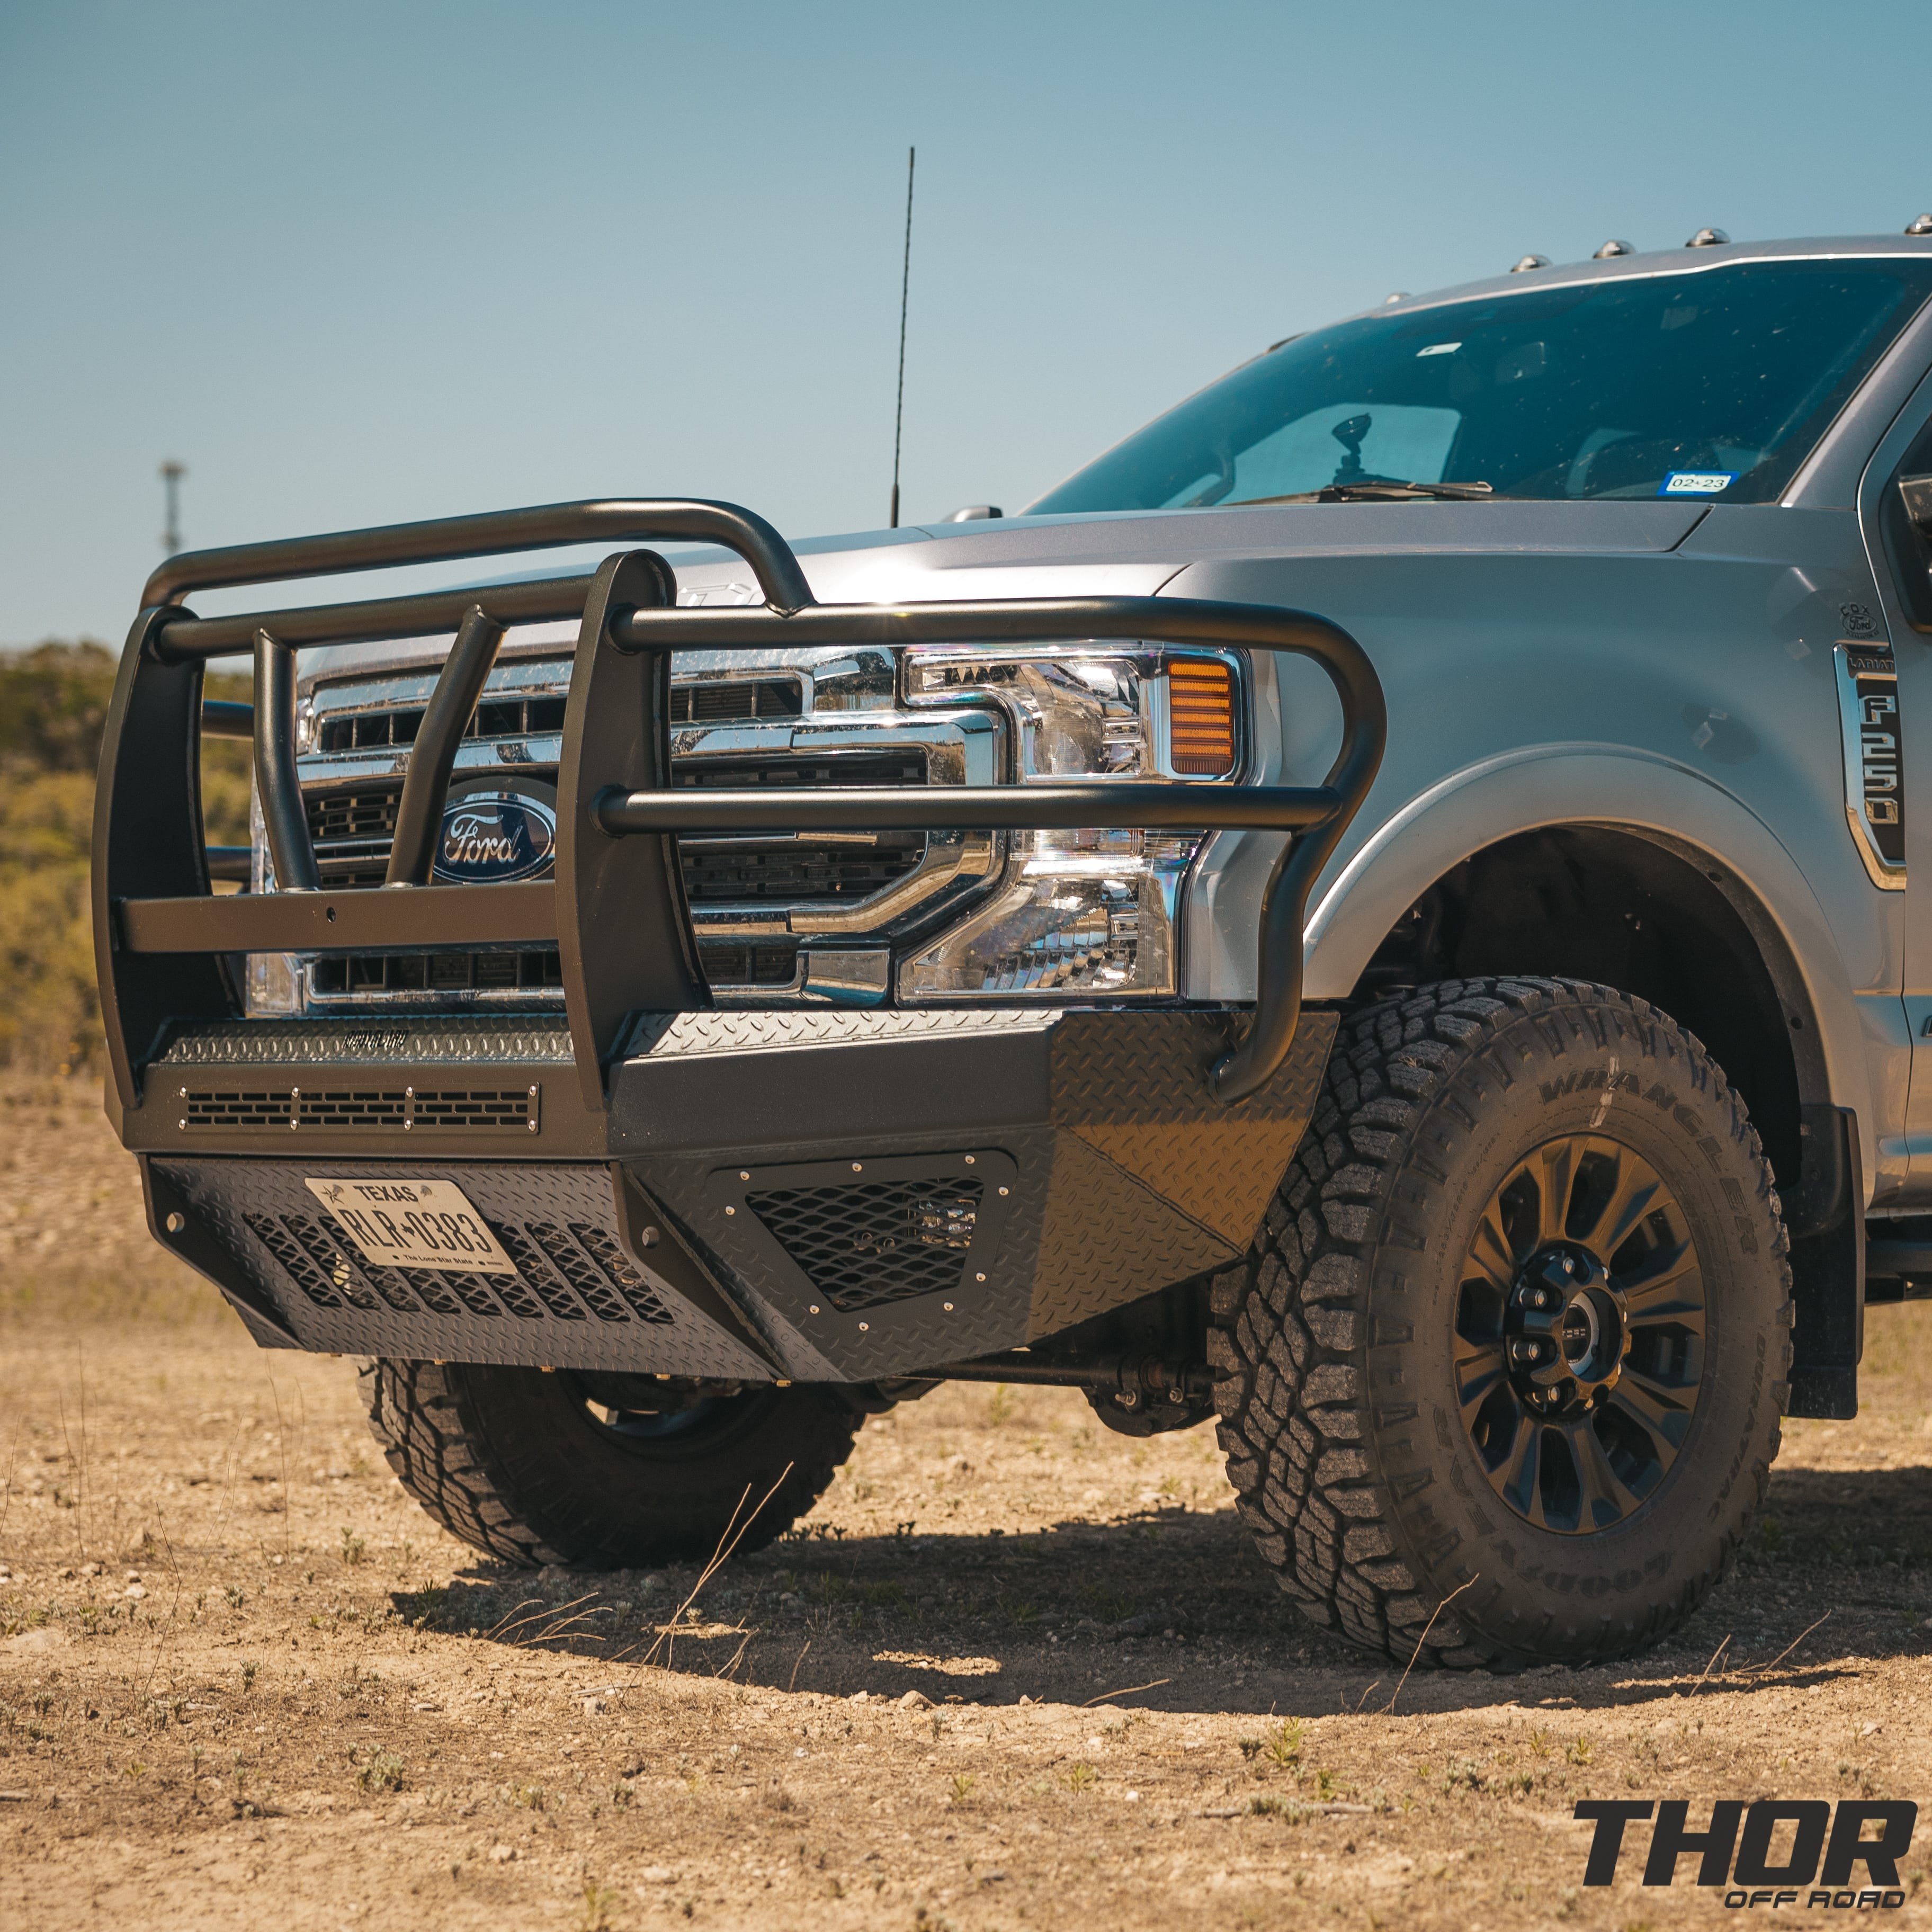 2022 Ford F-250 Super Duty Lariat in Silver with BodyGuard T2 Extreme Front and Rear Bumpers